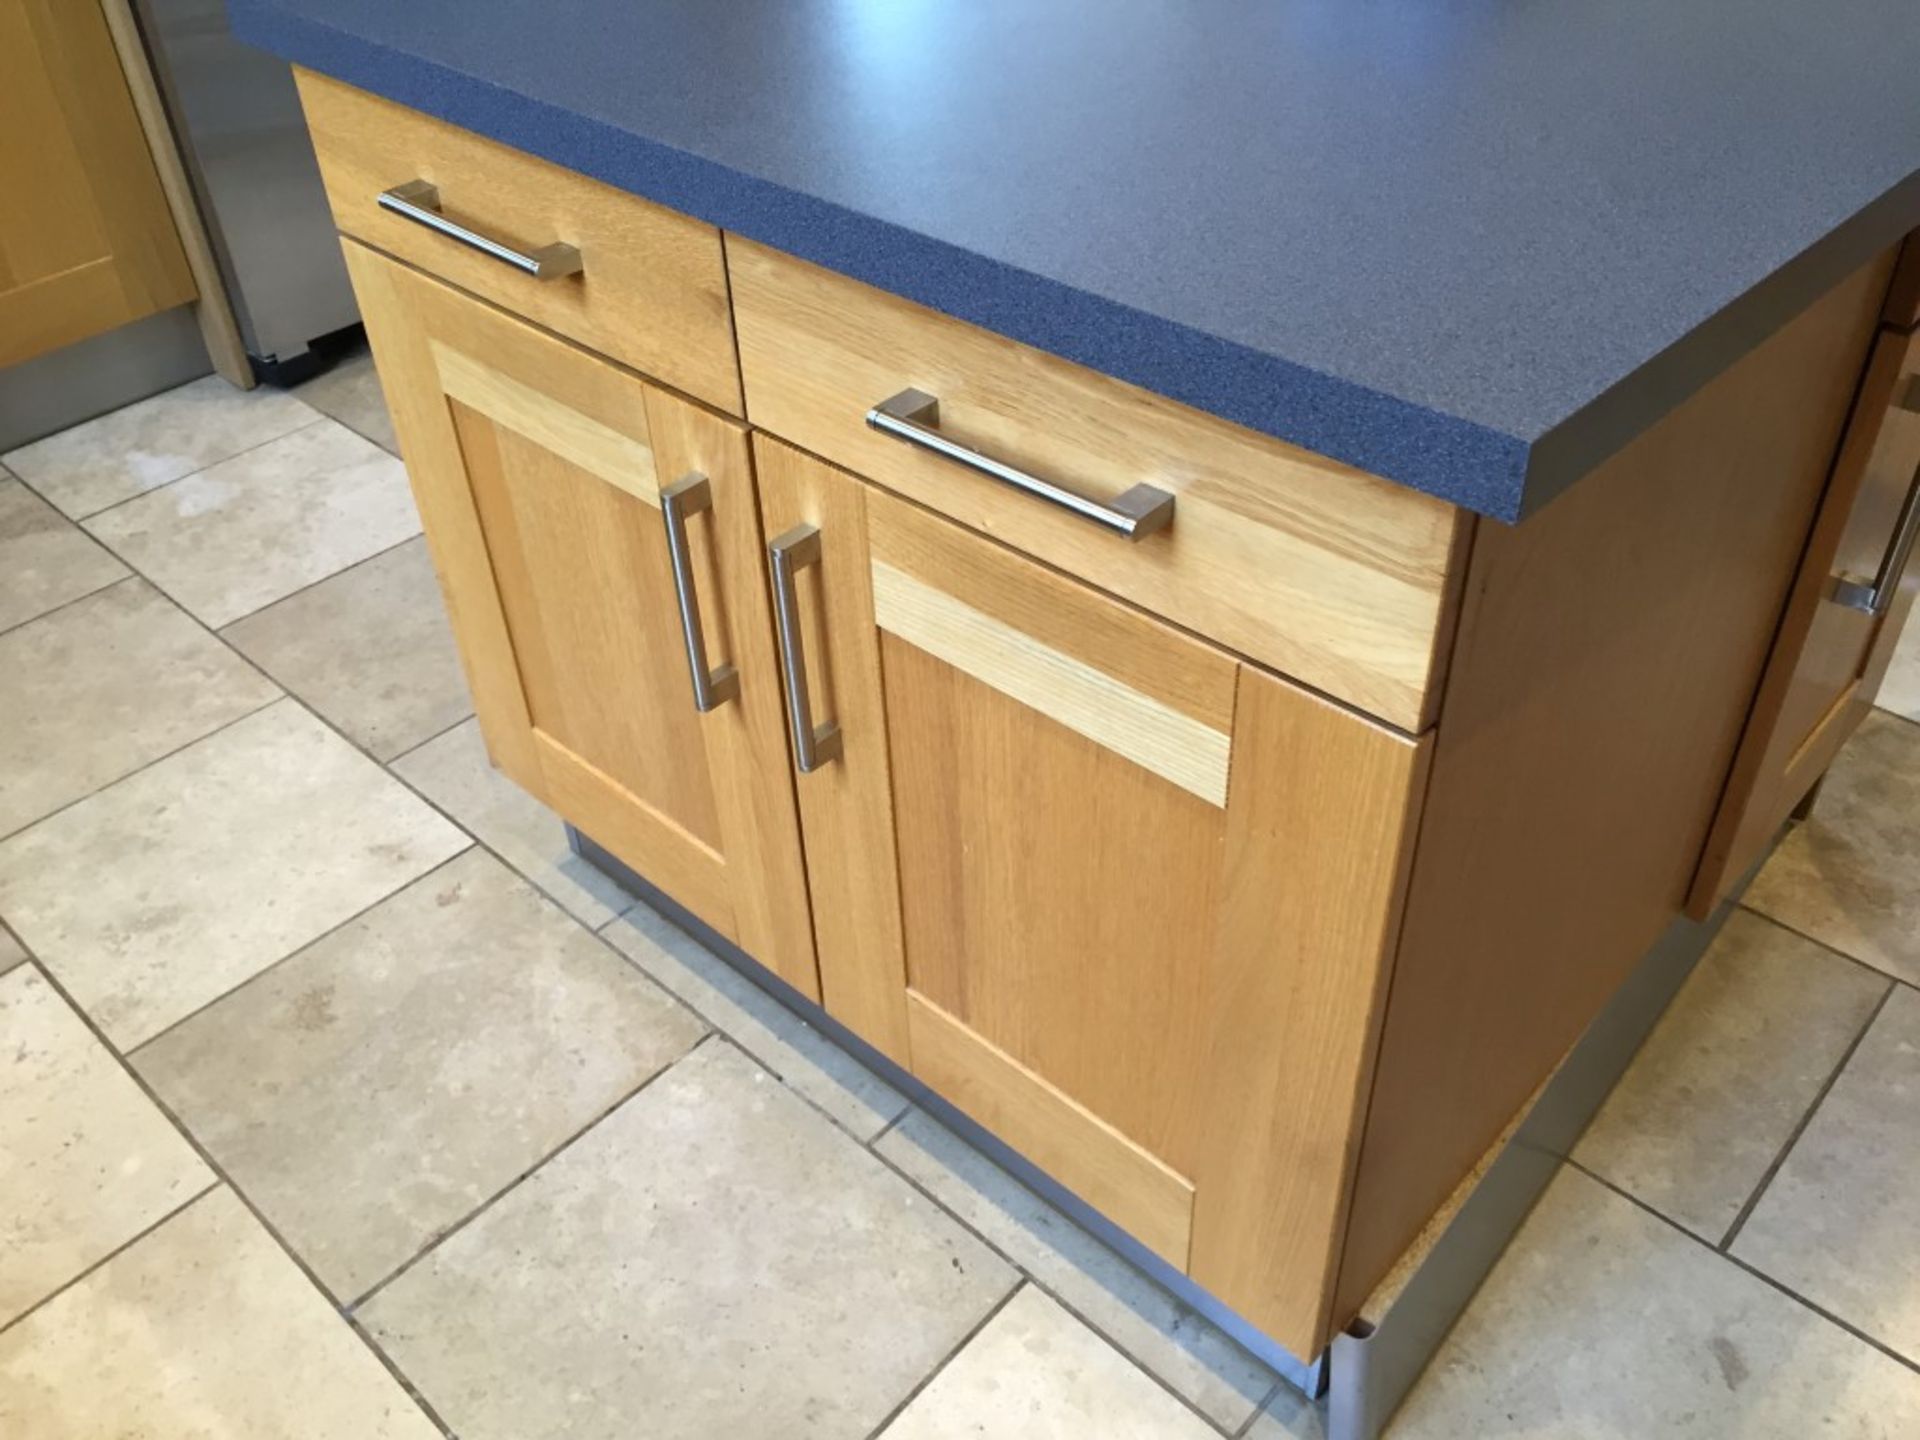 1 x Solid Wood Kitchen By English Rose With Breakfast Bar/Central Island Unit, Laminate Worktops And - Image 33 of 40